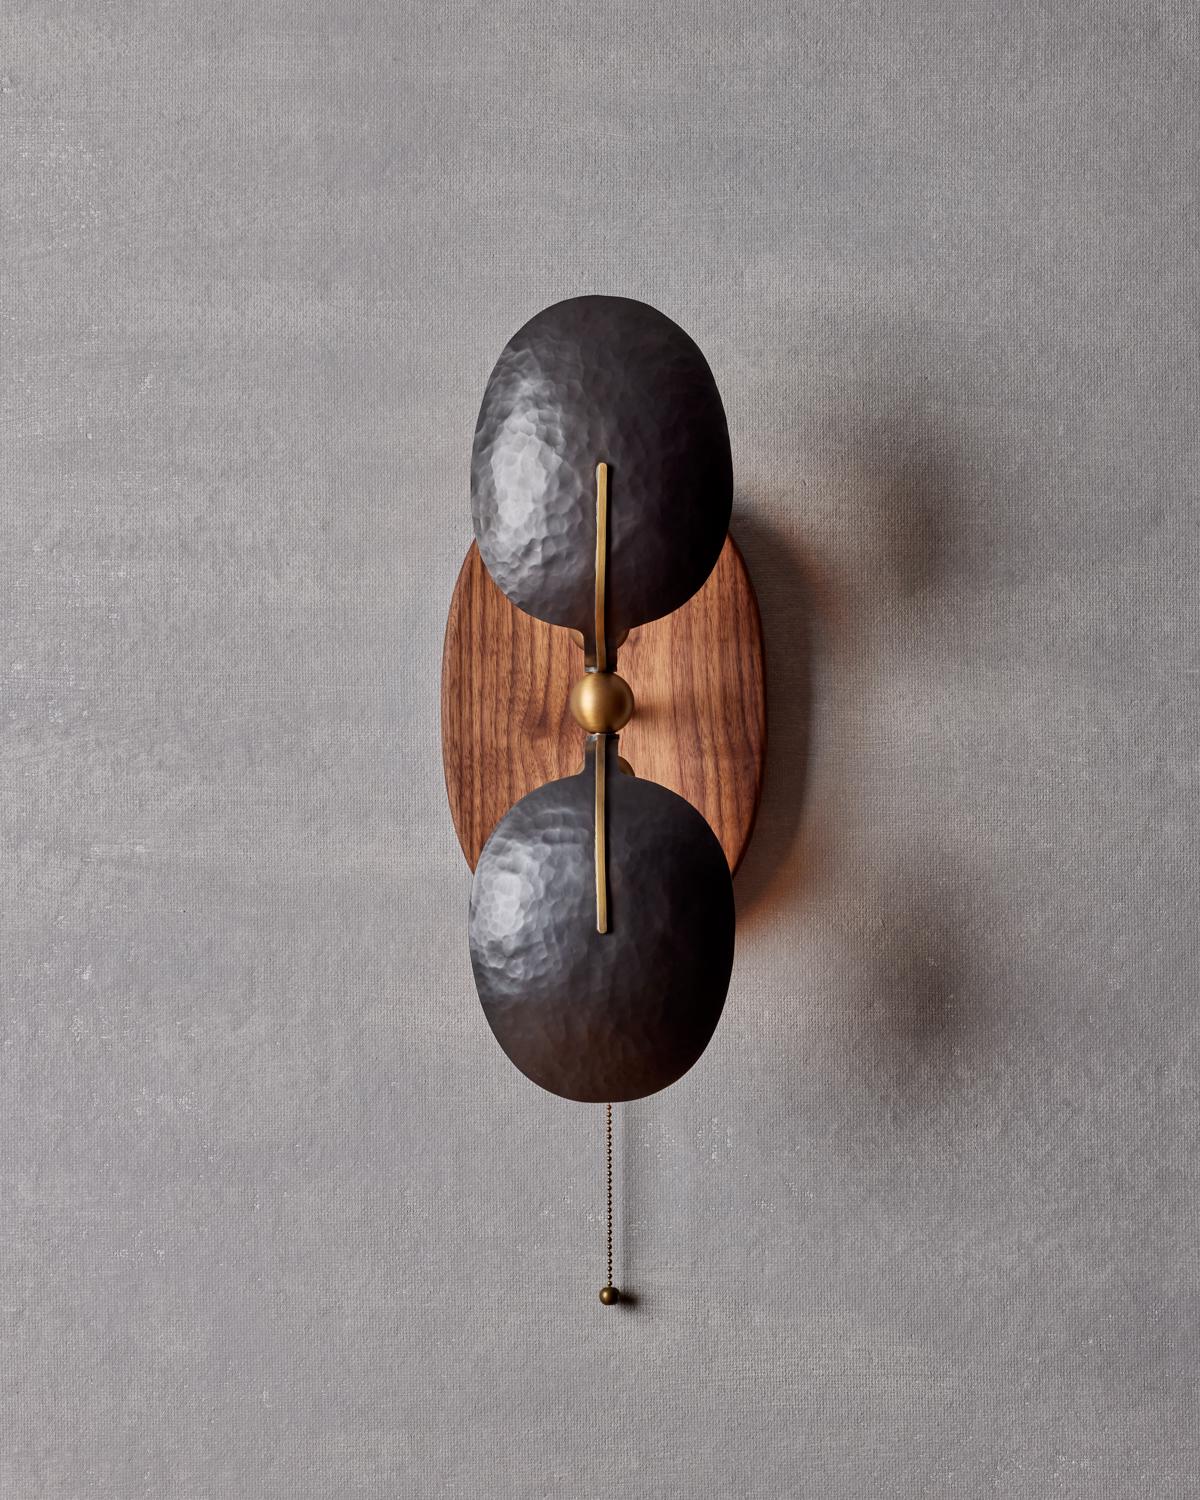 The Greta Sconce mounted from a slightly concave walnut backplate is accented with two bench-made bronze reflectors and oval brass sockets.

Materials:
Wood, Bronze, Brass

Fixture Finishes: Walnut, Light Antique Brass, Hand Hammered Bronze